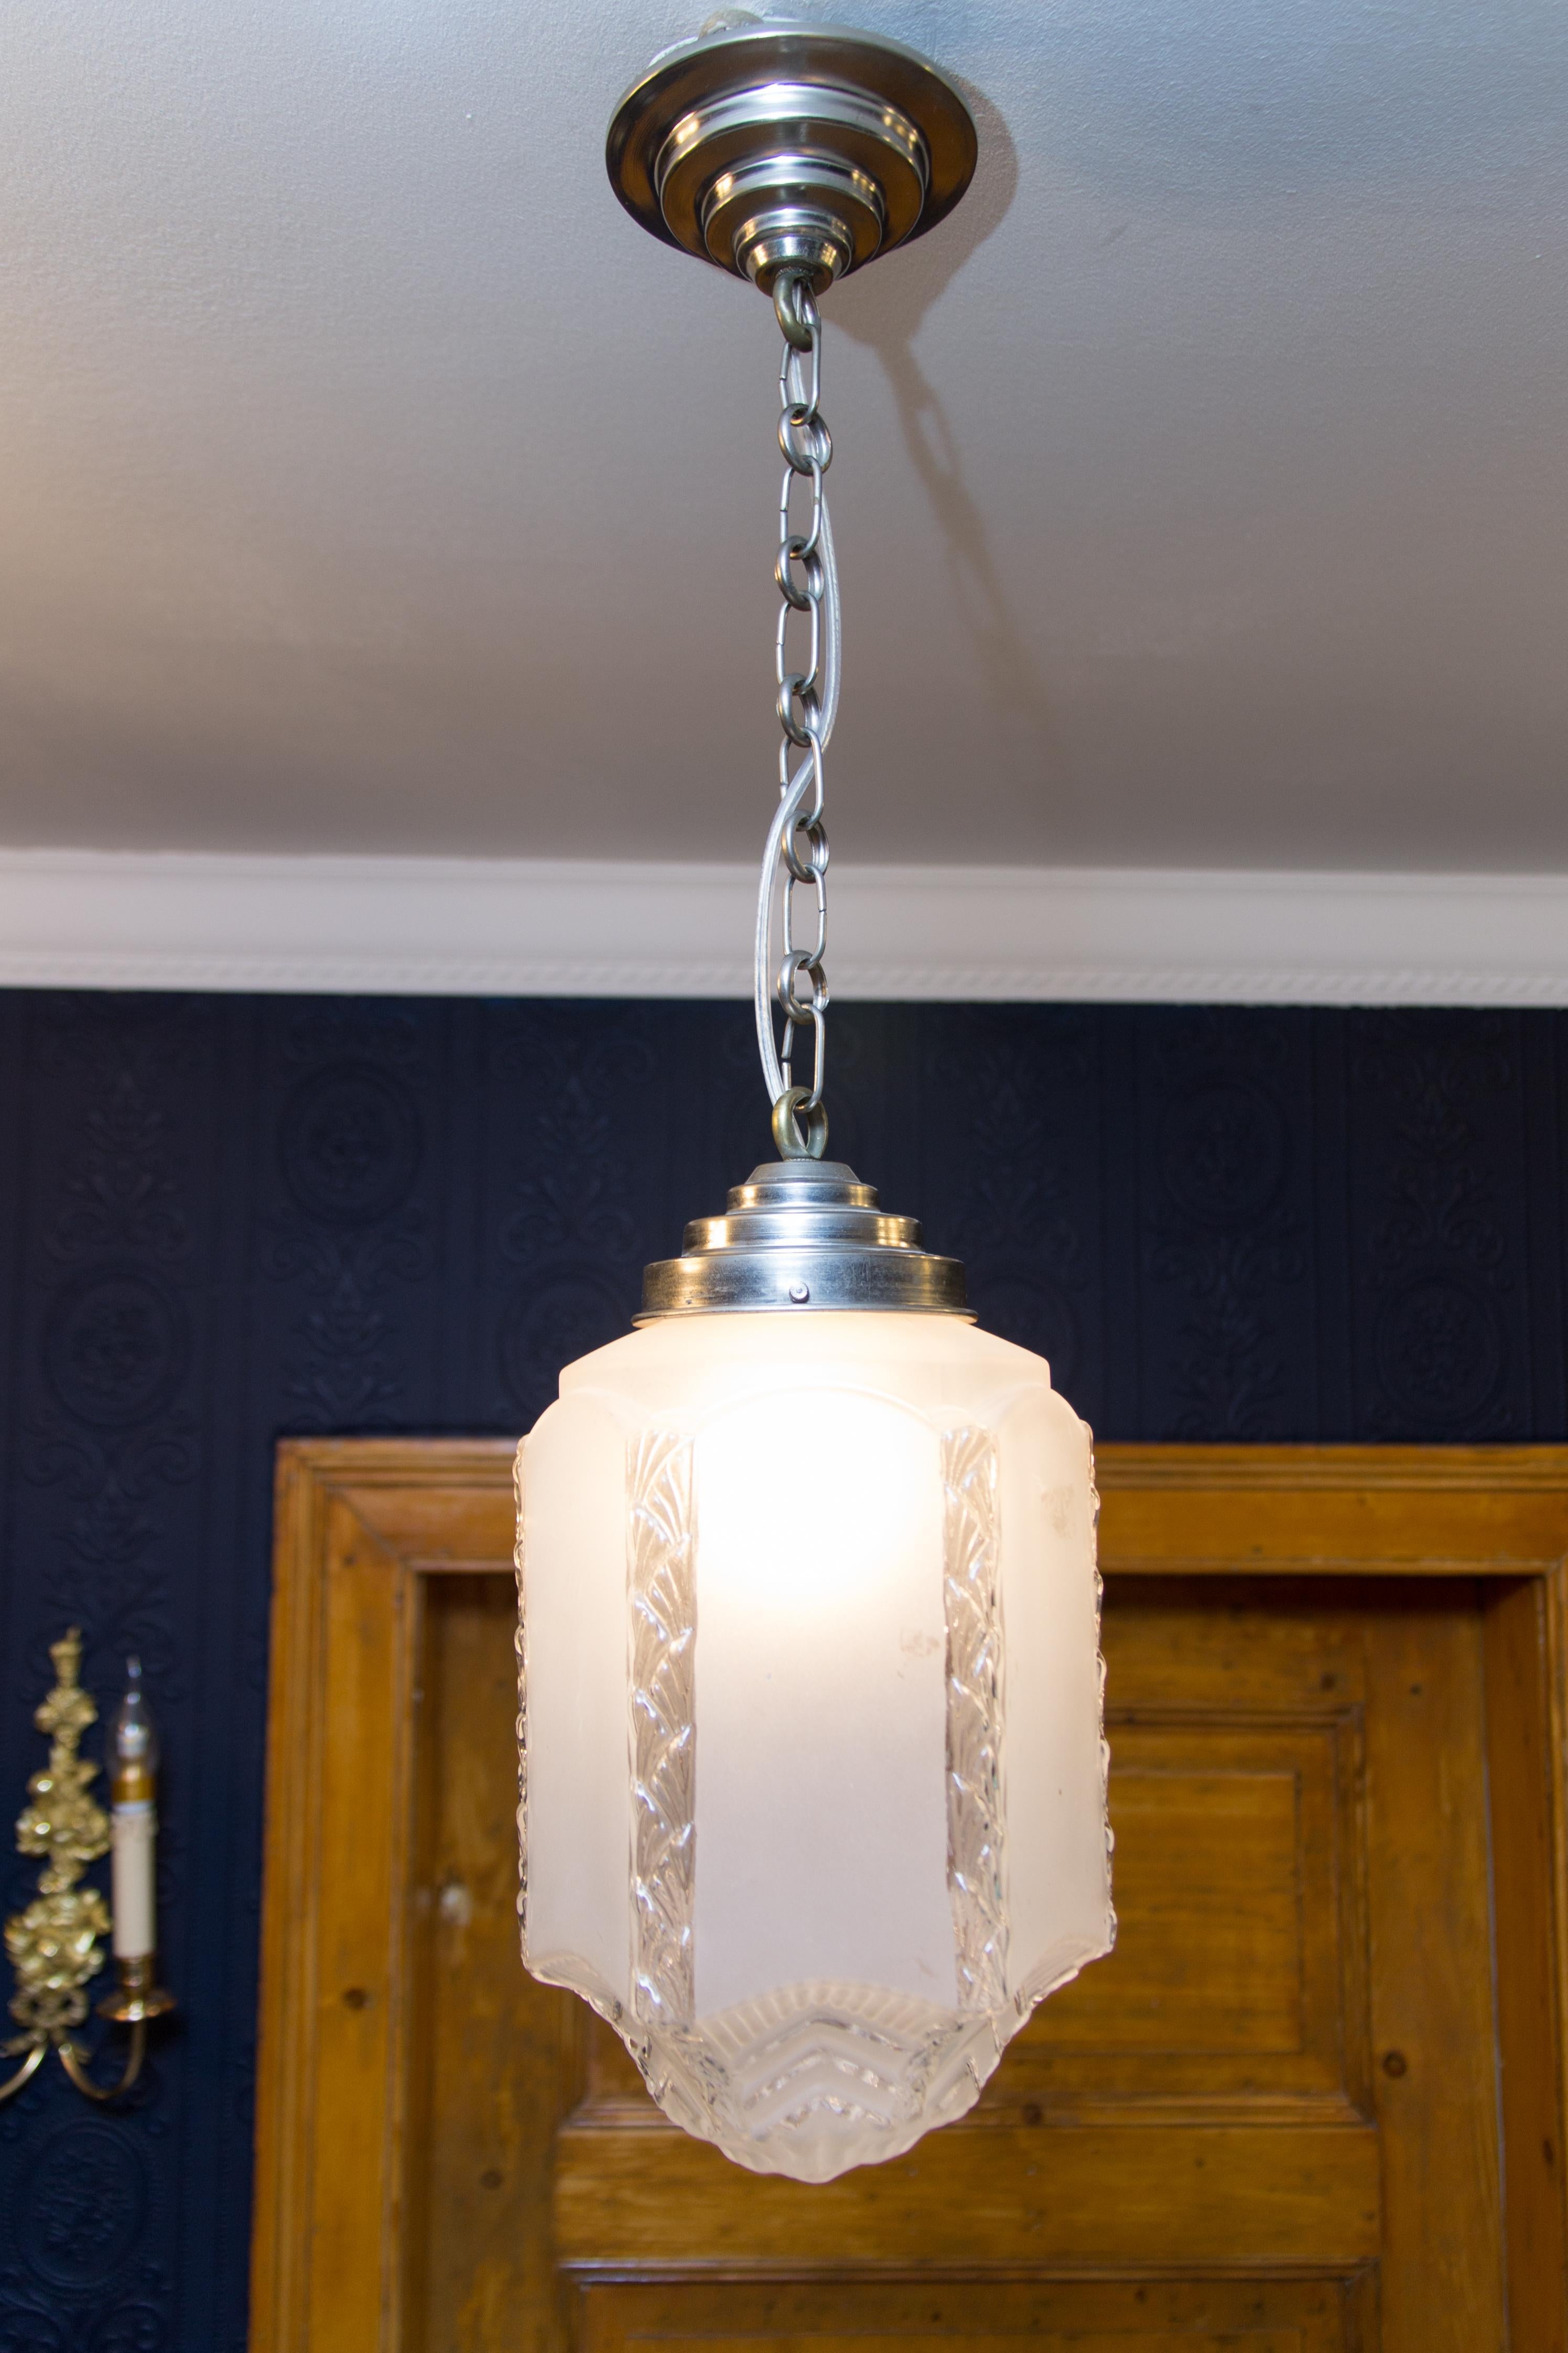 Art Deco style pendant light with frosted glass skyscraper shade from the 1930s.
Measures: Total height is 26.3 inches / 67 cm; height without chain - 11.8 inches / 30 cm; diameter - 7.9 inches / 20 cm.